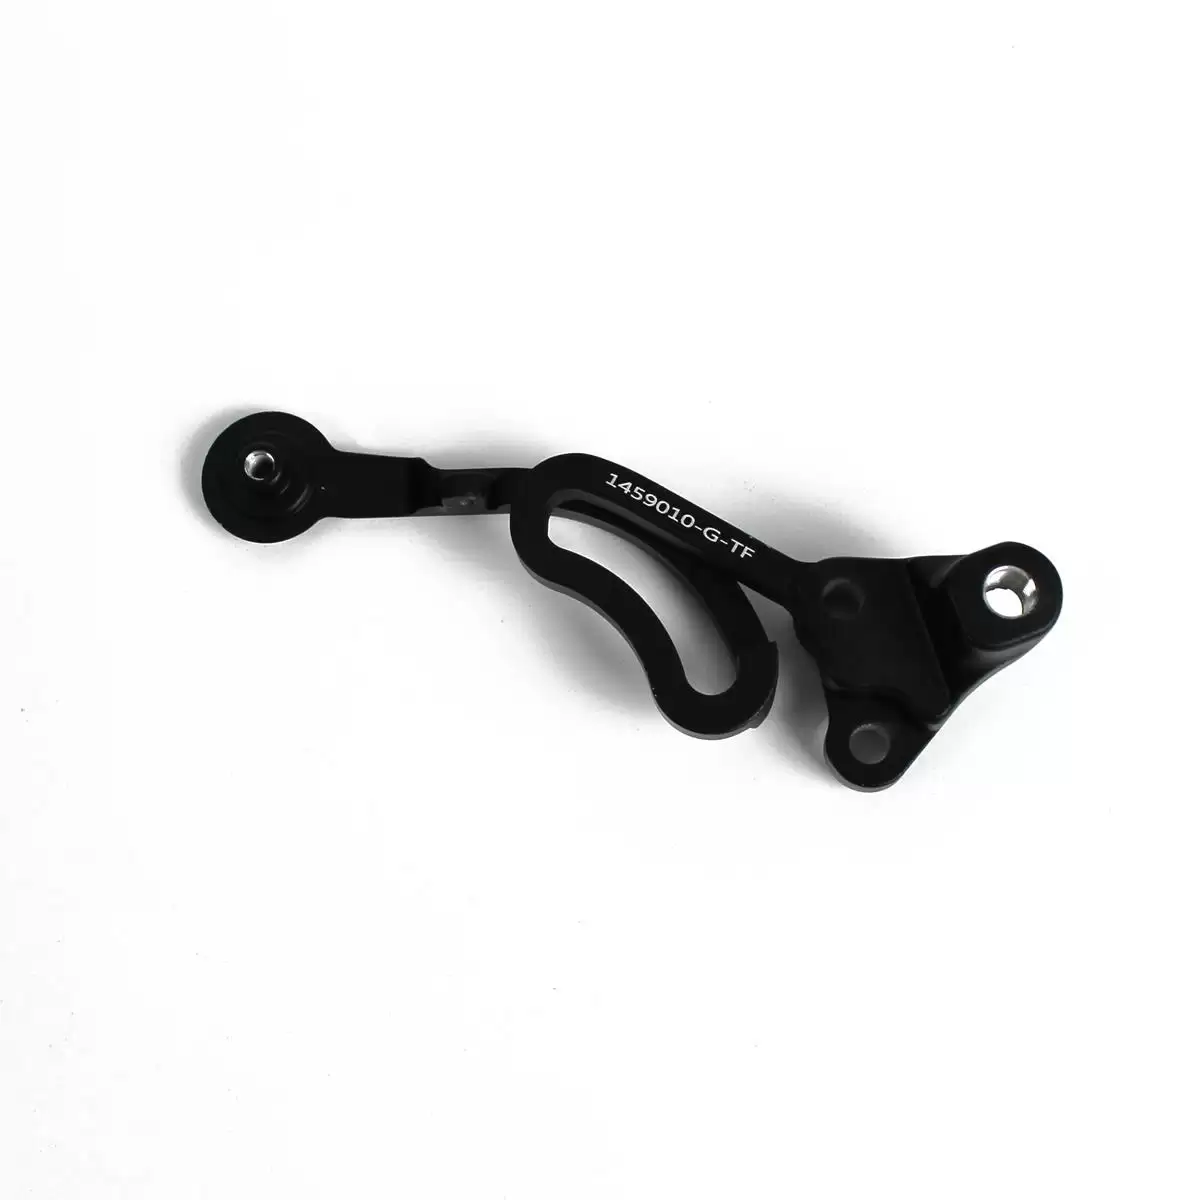 Spare torque arm for Powerplay models - image